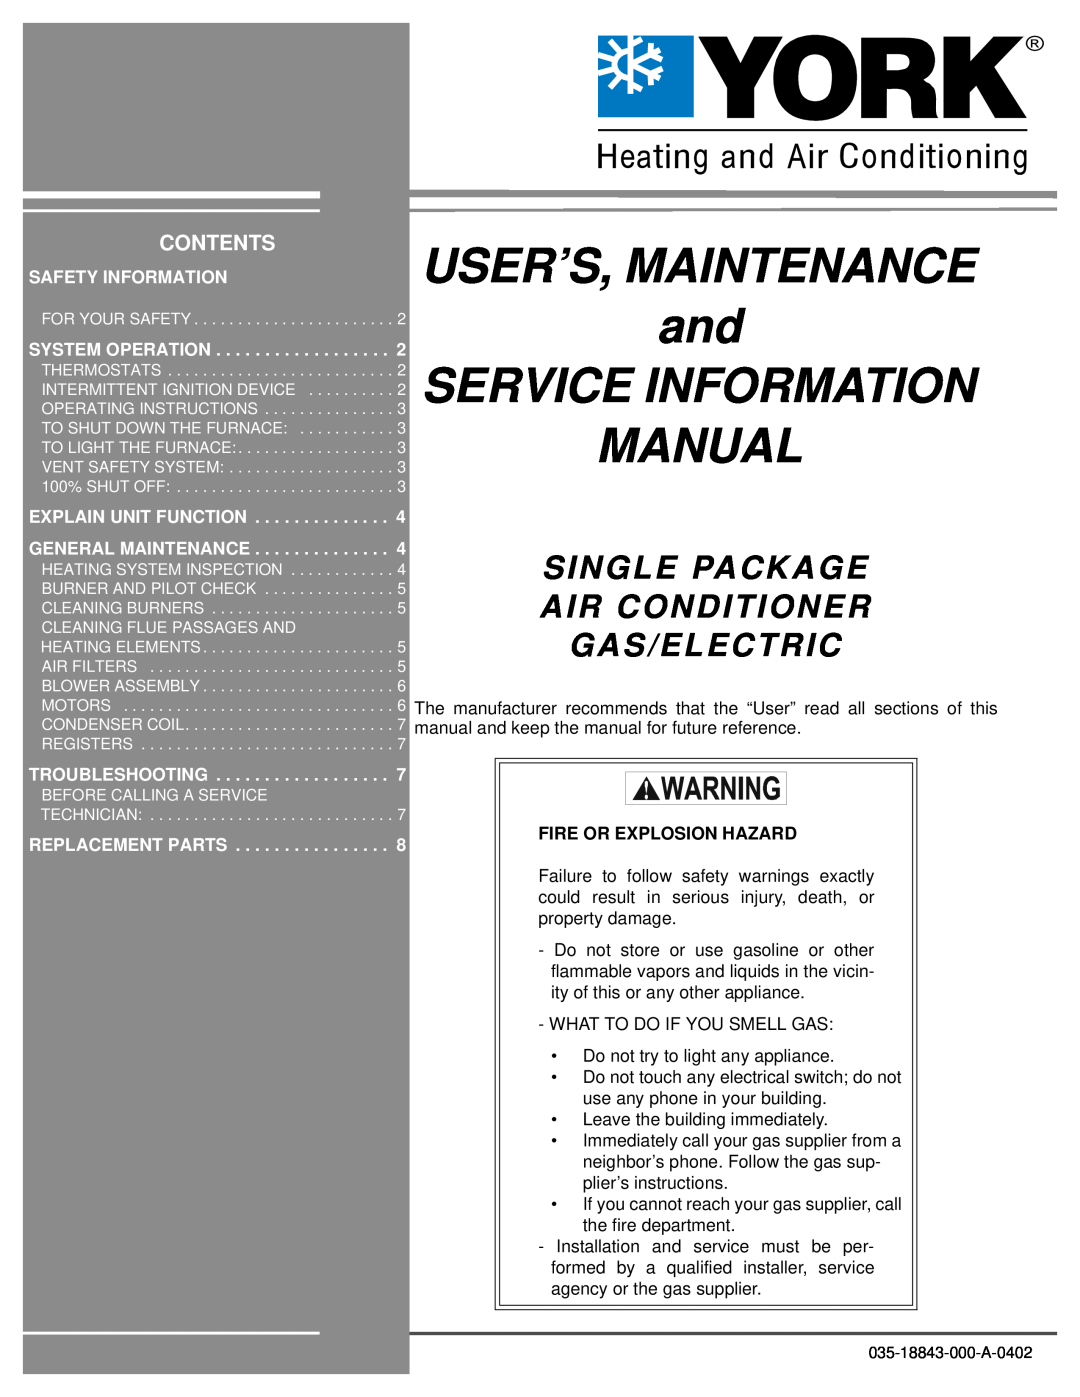 York 035-18843-000-a-0402 manual Fire Or Explosion Hazard, USER’S, MAINTENANCE and SERVICE INFORMATION, Manual, Contents 